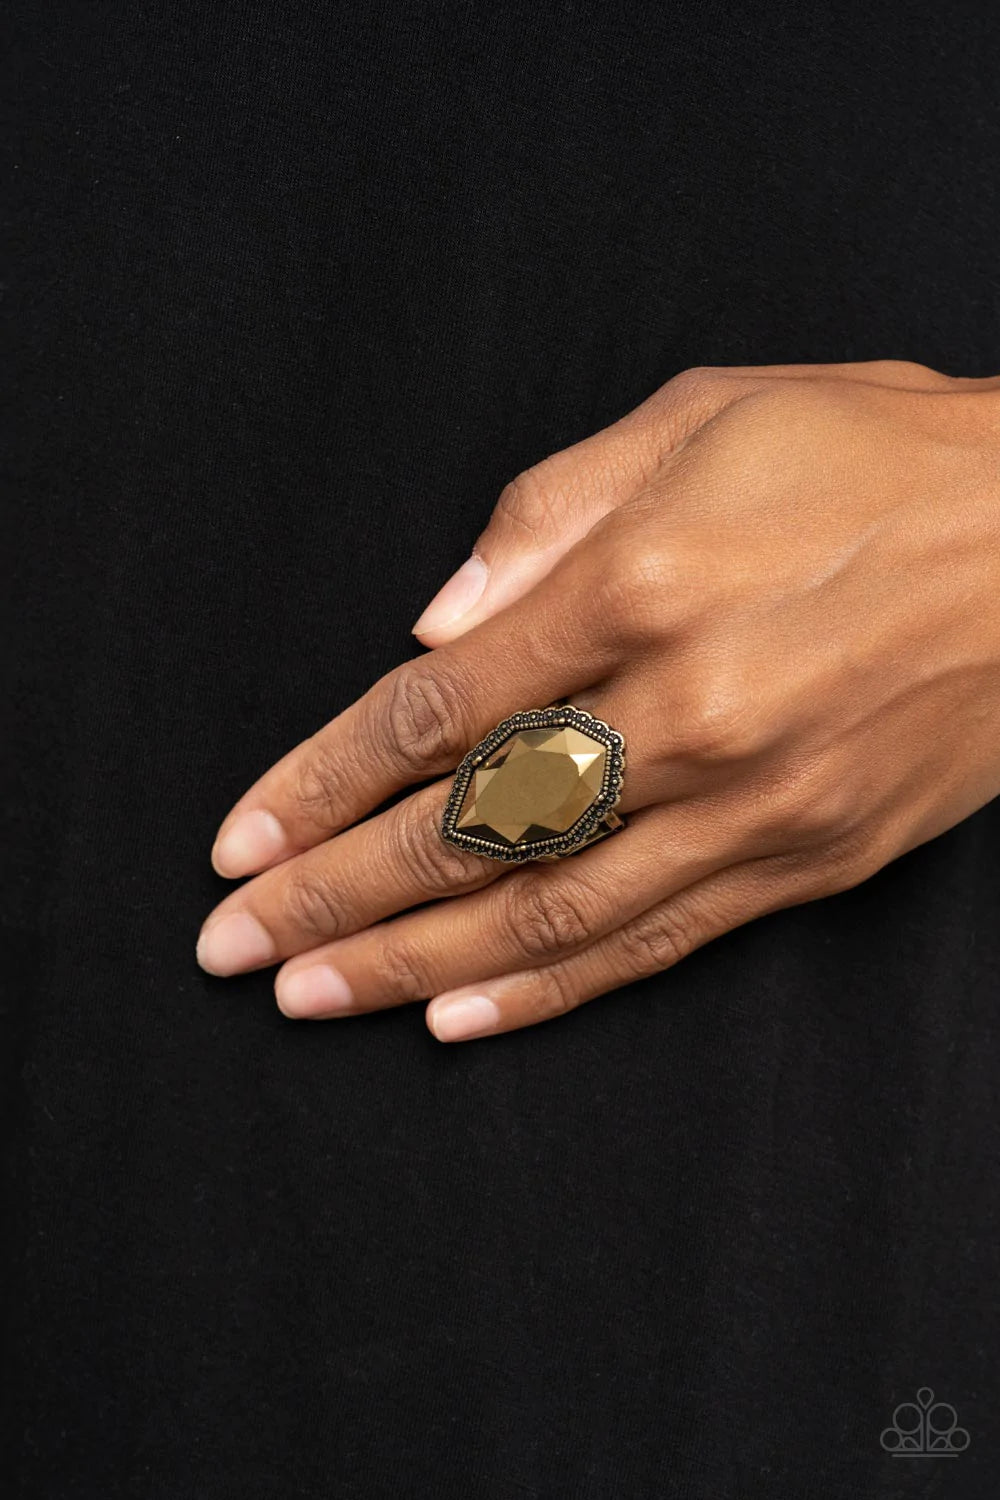 Paparazzi Accessories Avant-GRANDEUR - Brass An oversized faceted aurum gem is nestled inside a scalloped brass frame radiating with studded textures, resulting in a radiant centerpiece atop the finger. Features a stretchy band for a flexible fit. Sold as